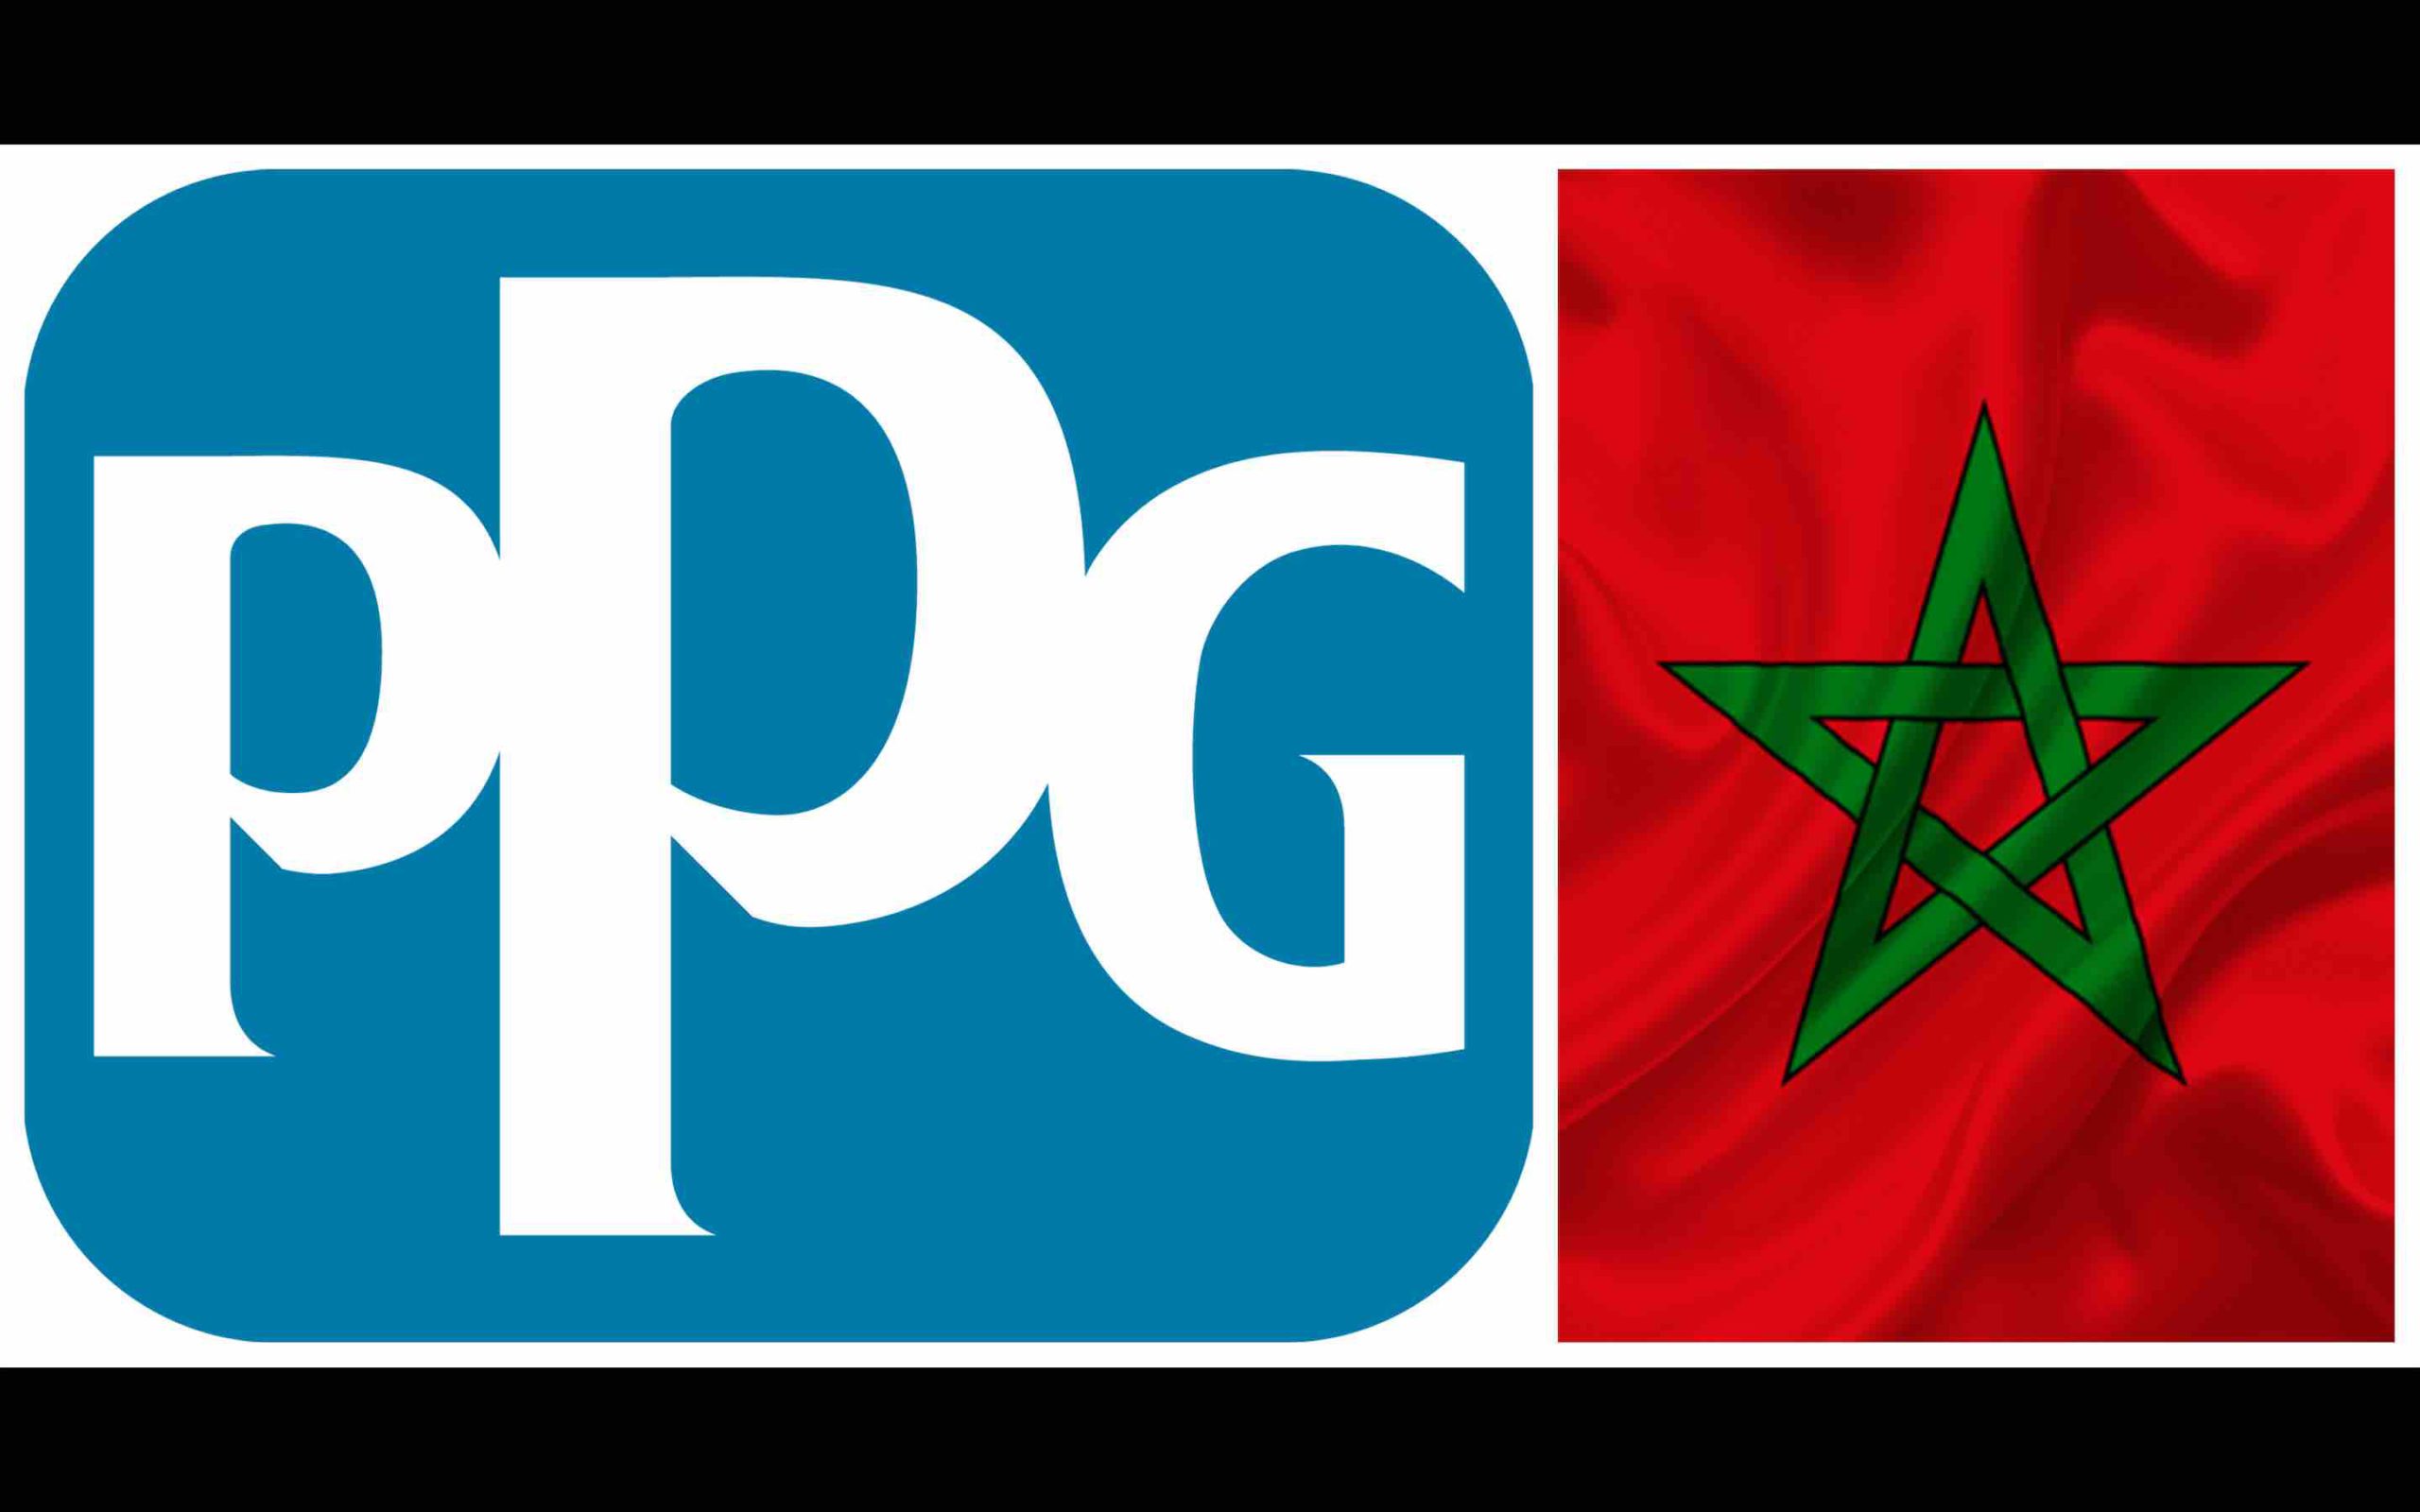 U.S. PPG opens in Morocco its 1st African automotive sealants plant